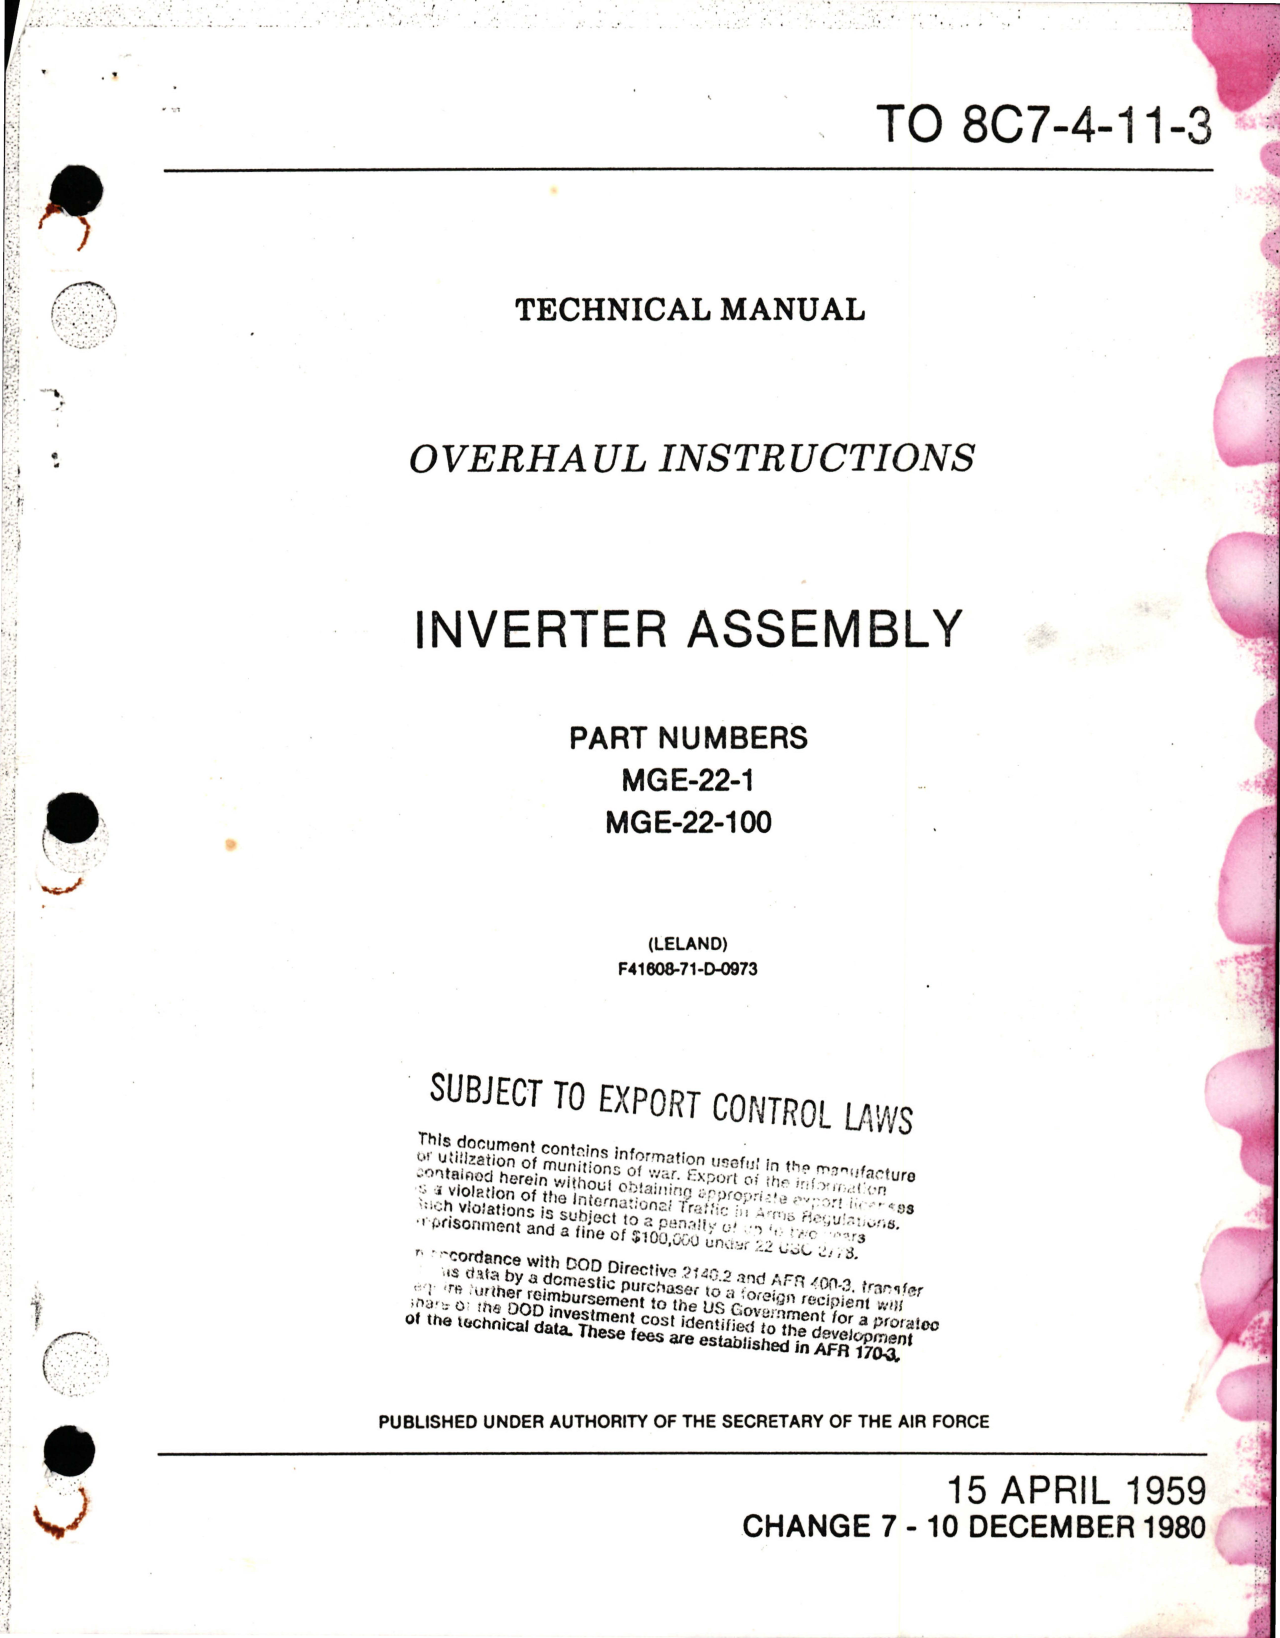 Sample page 1 from AirCorps Library document: Overhaul Instructions for Inverter Assembly - Parts MGE-22-1, MGE-22-100